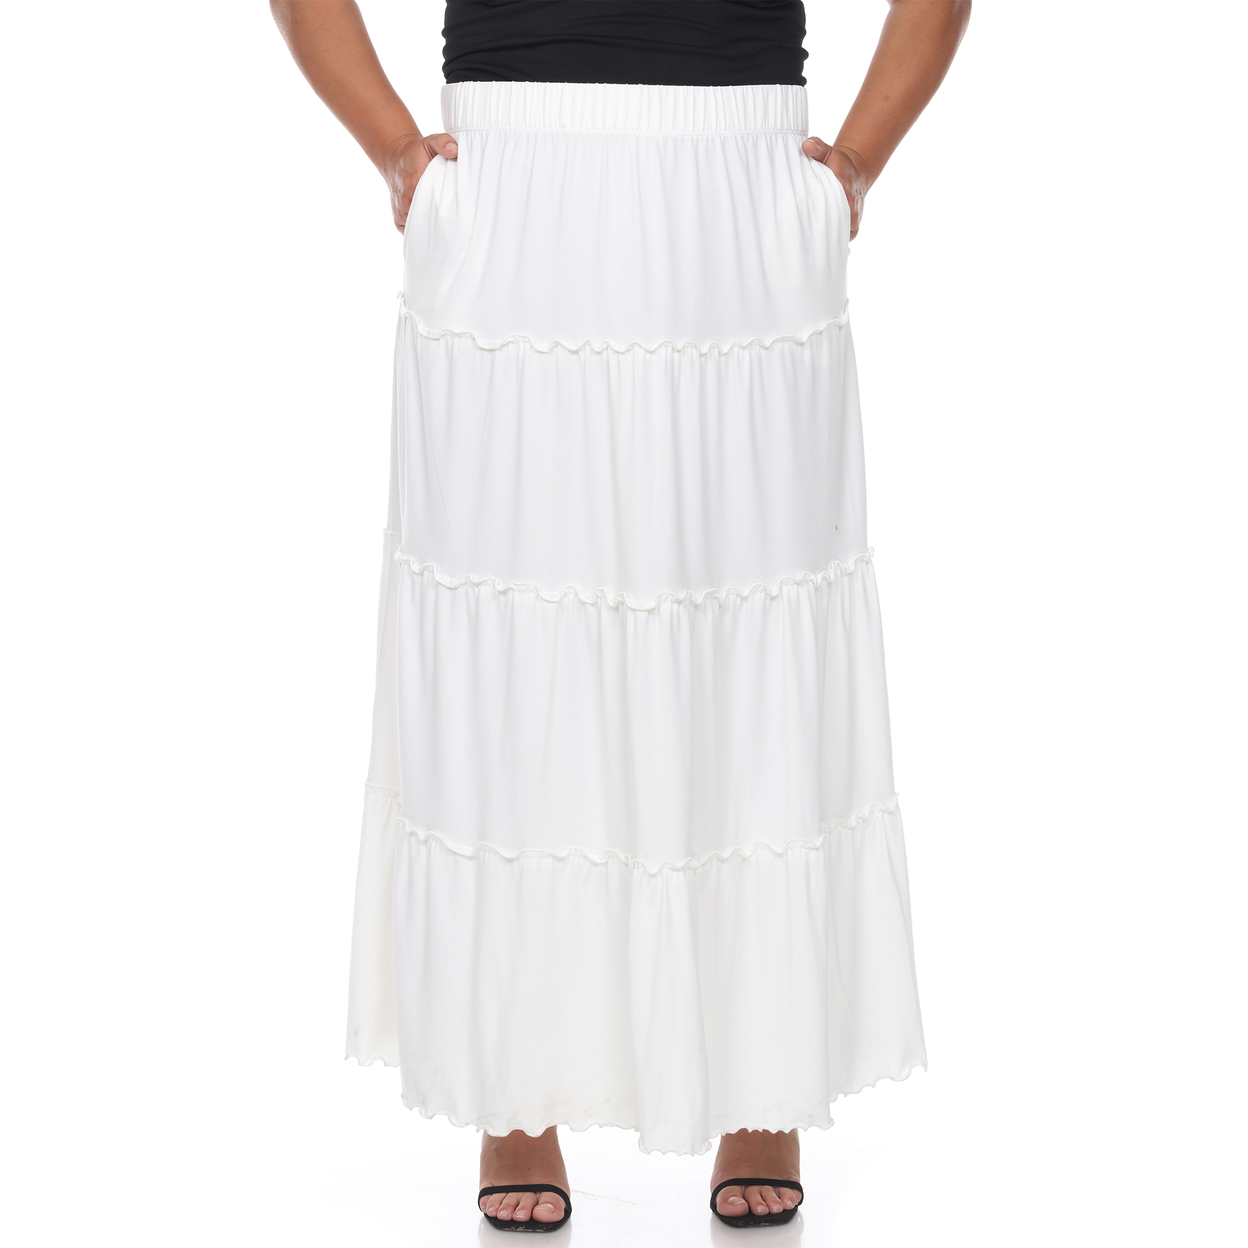 White Mark Women's Plus Size Tiered Maxi Skirt With Pockets - Navy, 1x